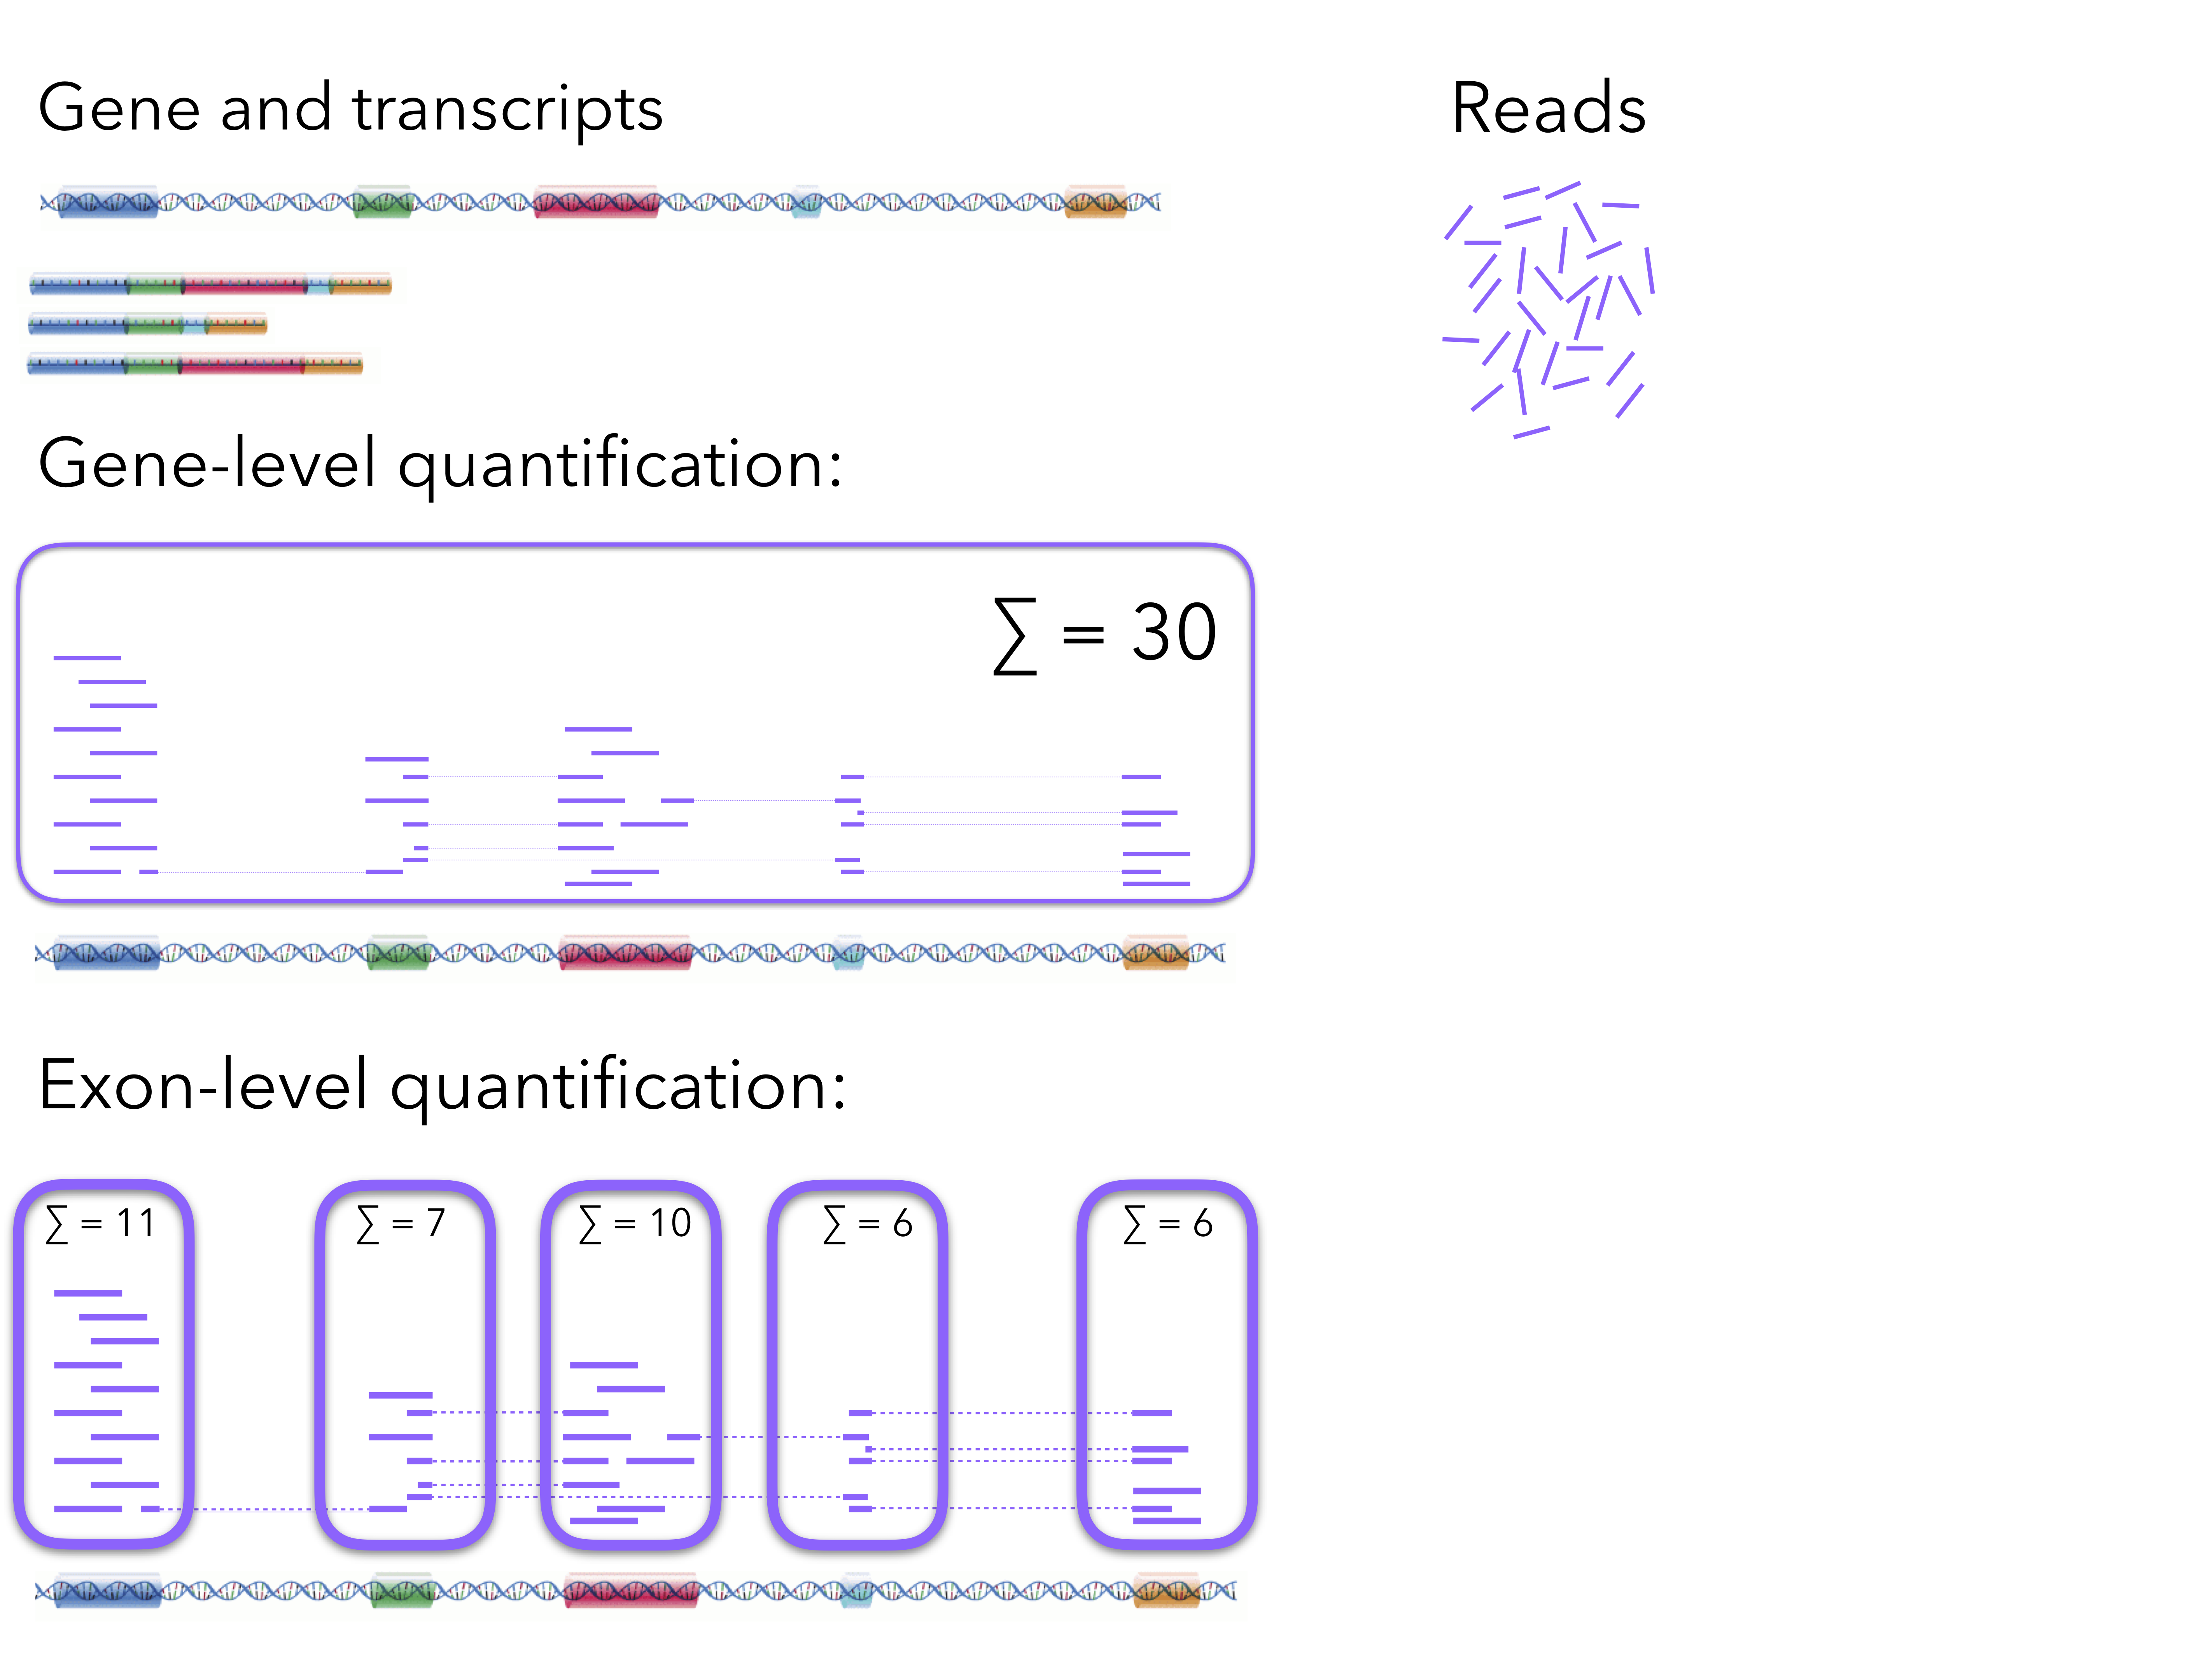 Figure: Gene- and exon-level read counting. Image adapted from Charlotte Soneson.